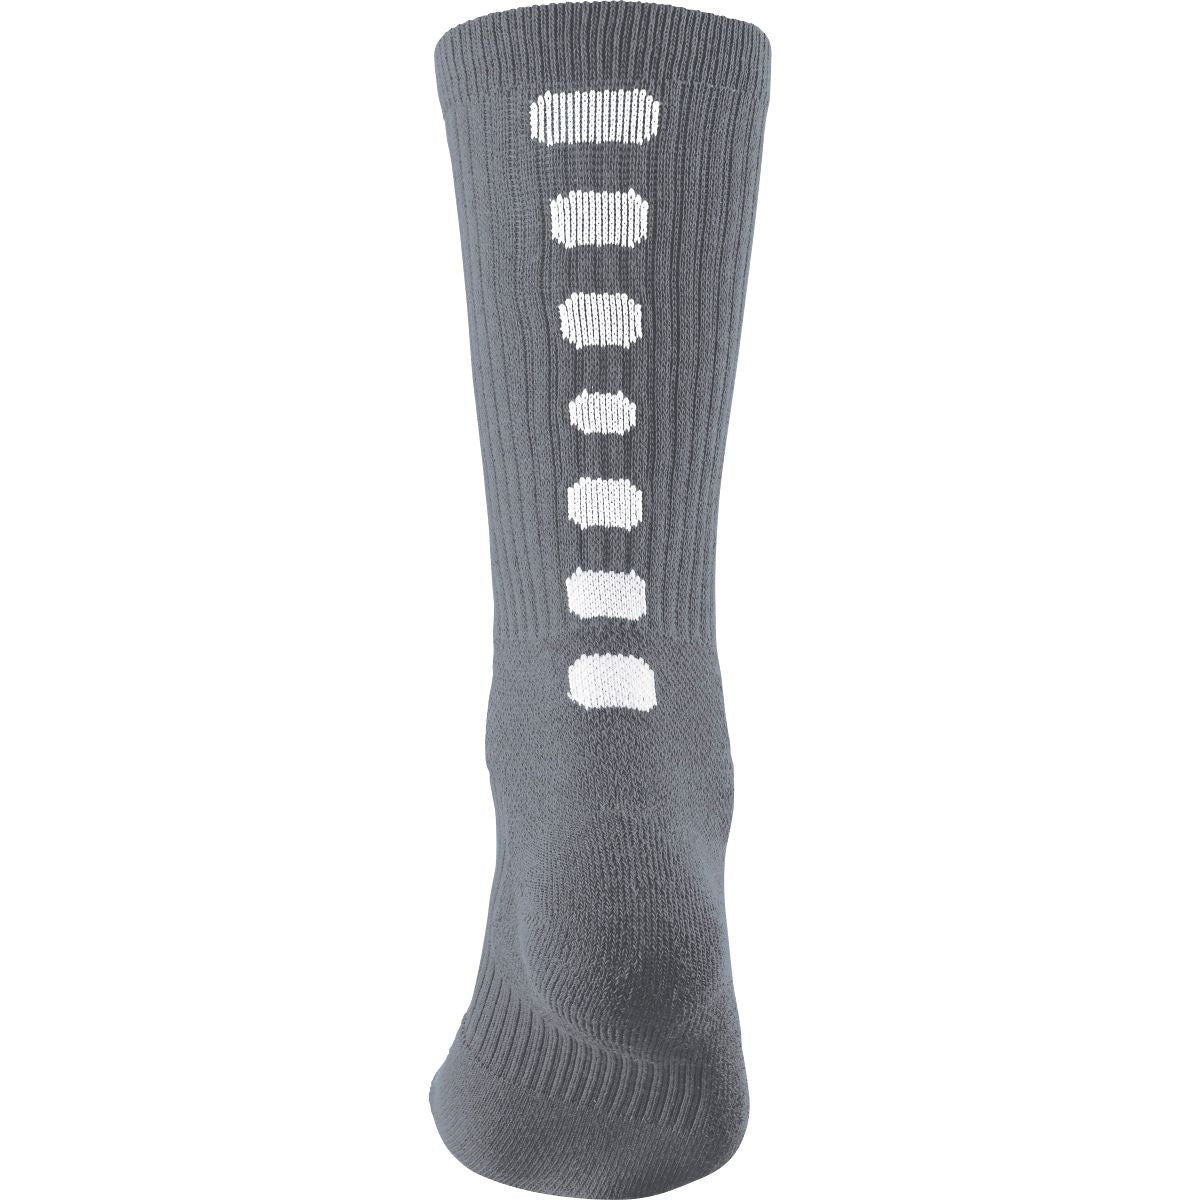 Augusta Sportswear Color Block Crew Sock in Graphite/White  -Part of the Adult, Augusta-Products, Accessories-Socks product lines at KanaleyCreations.com